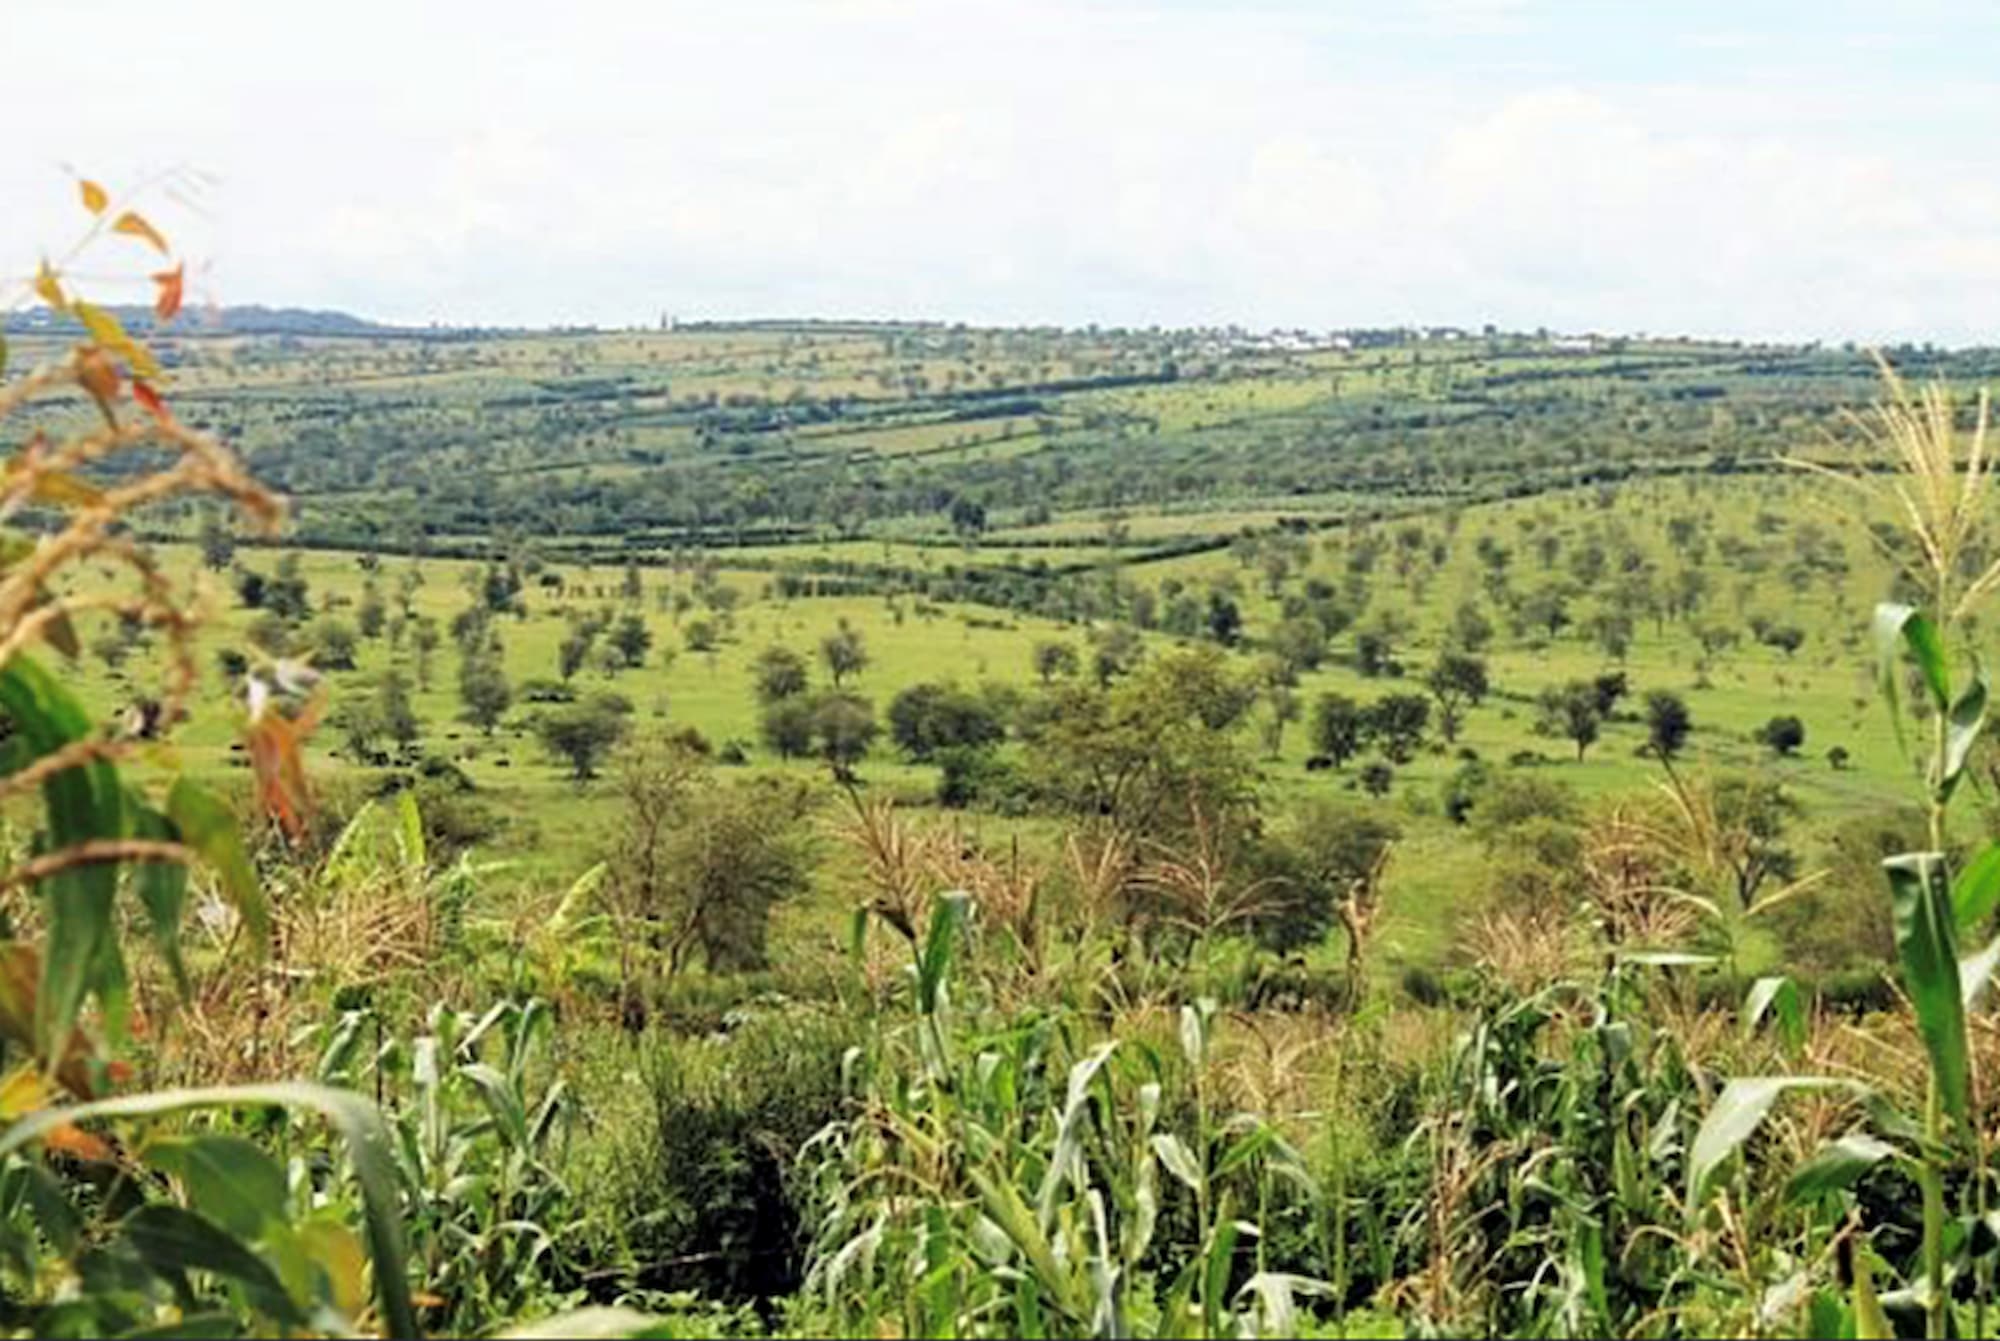 Agroforestry practice